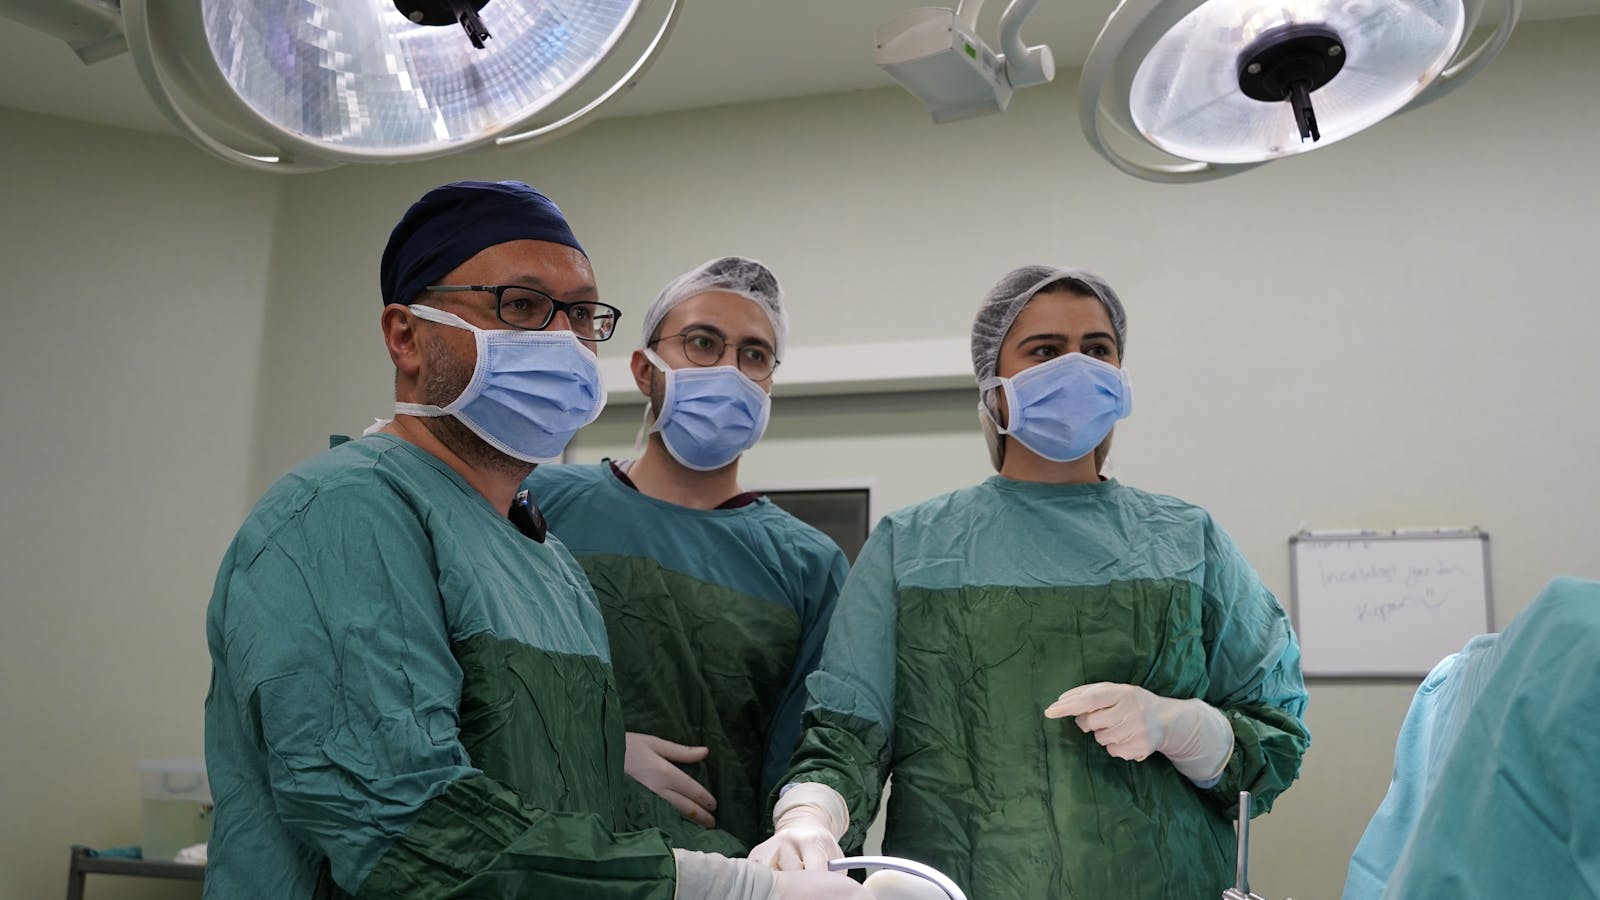 A Group of Doctors in an Operating Room